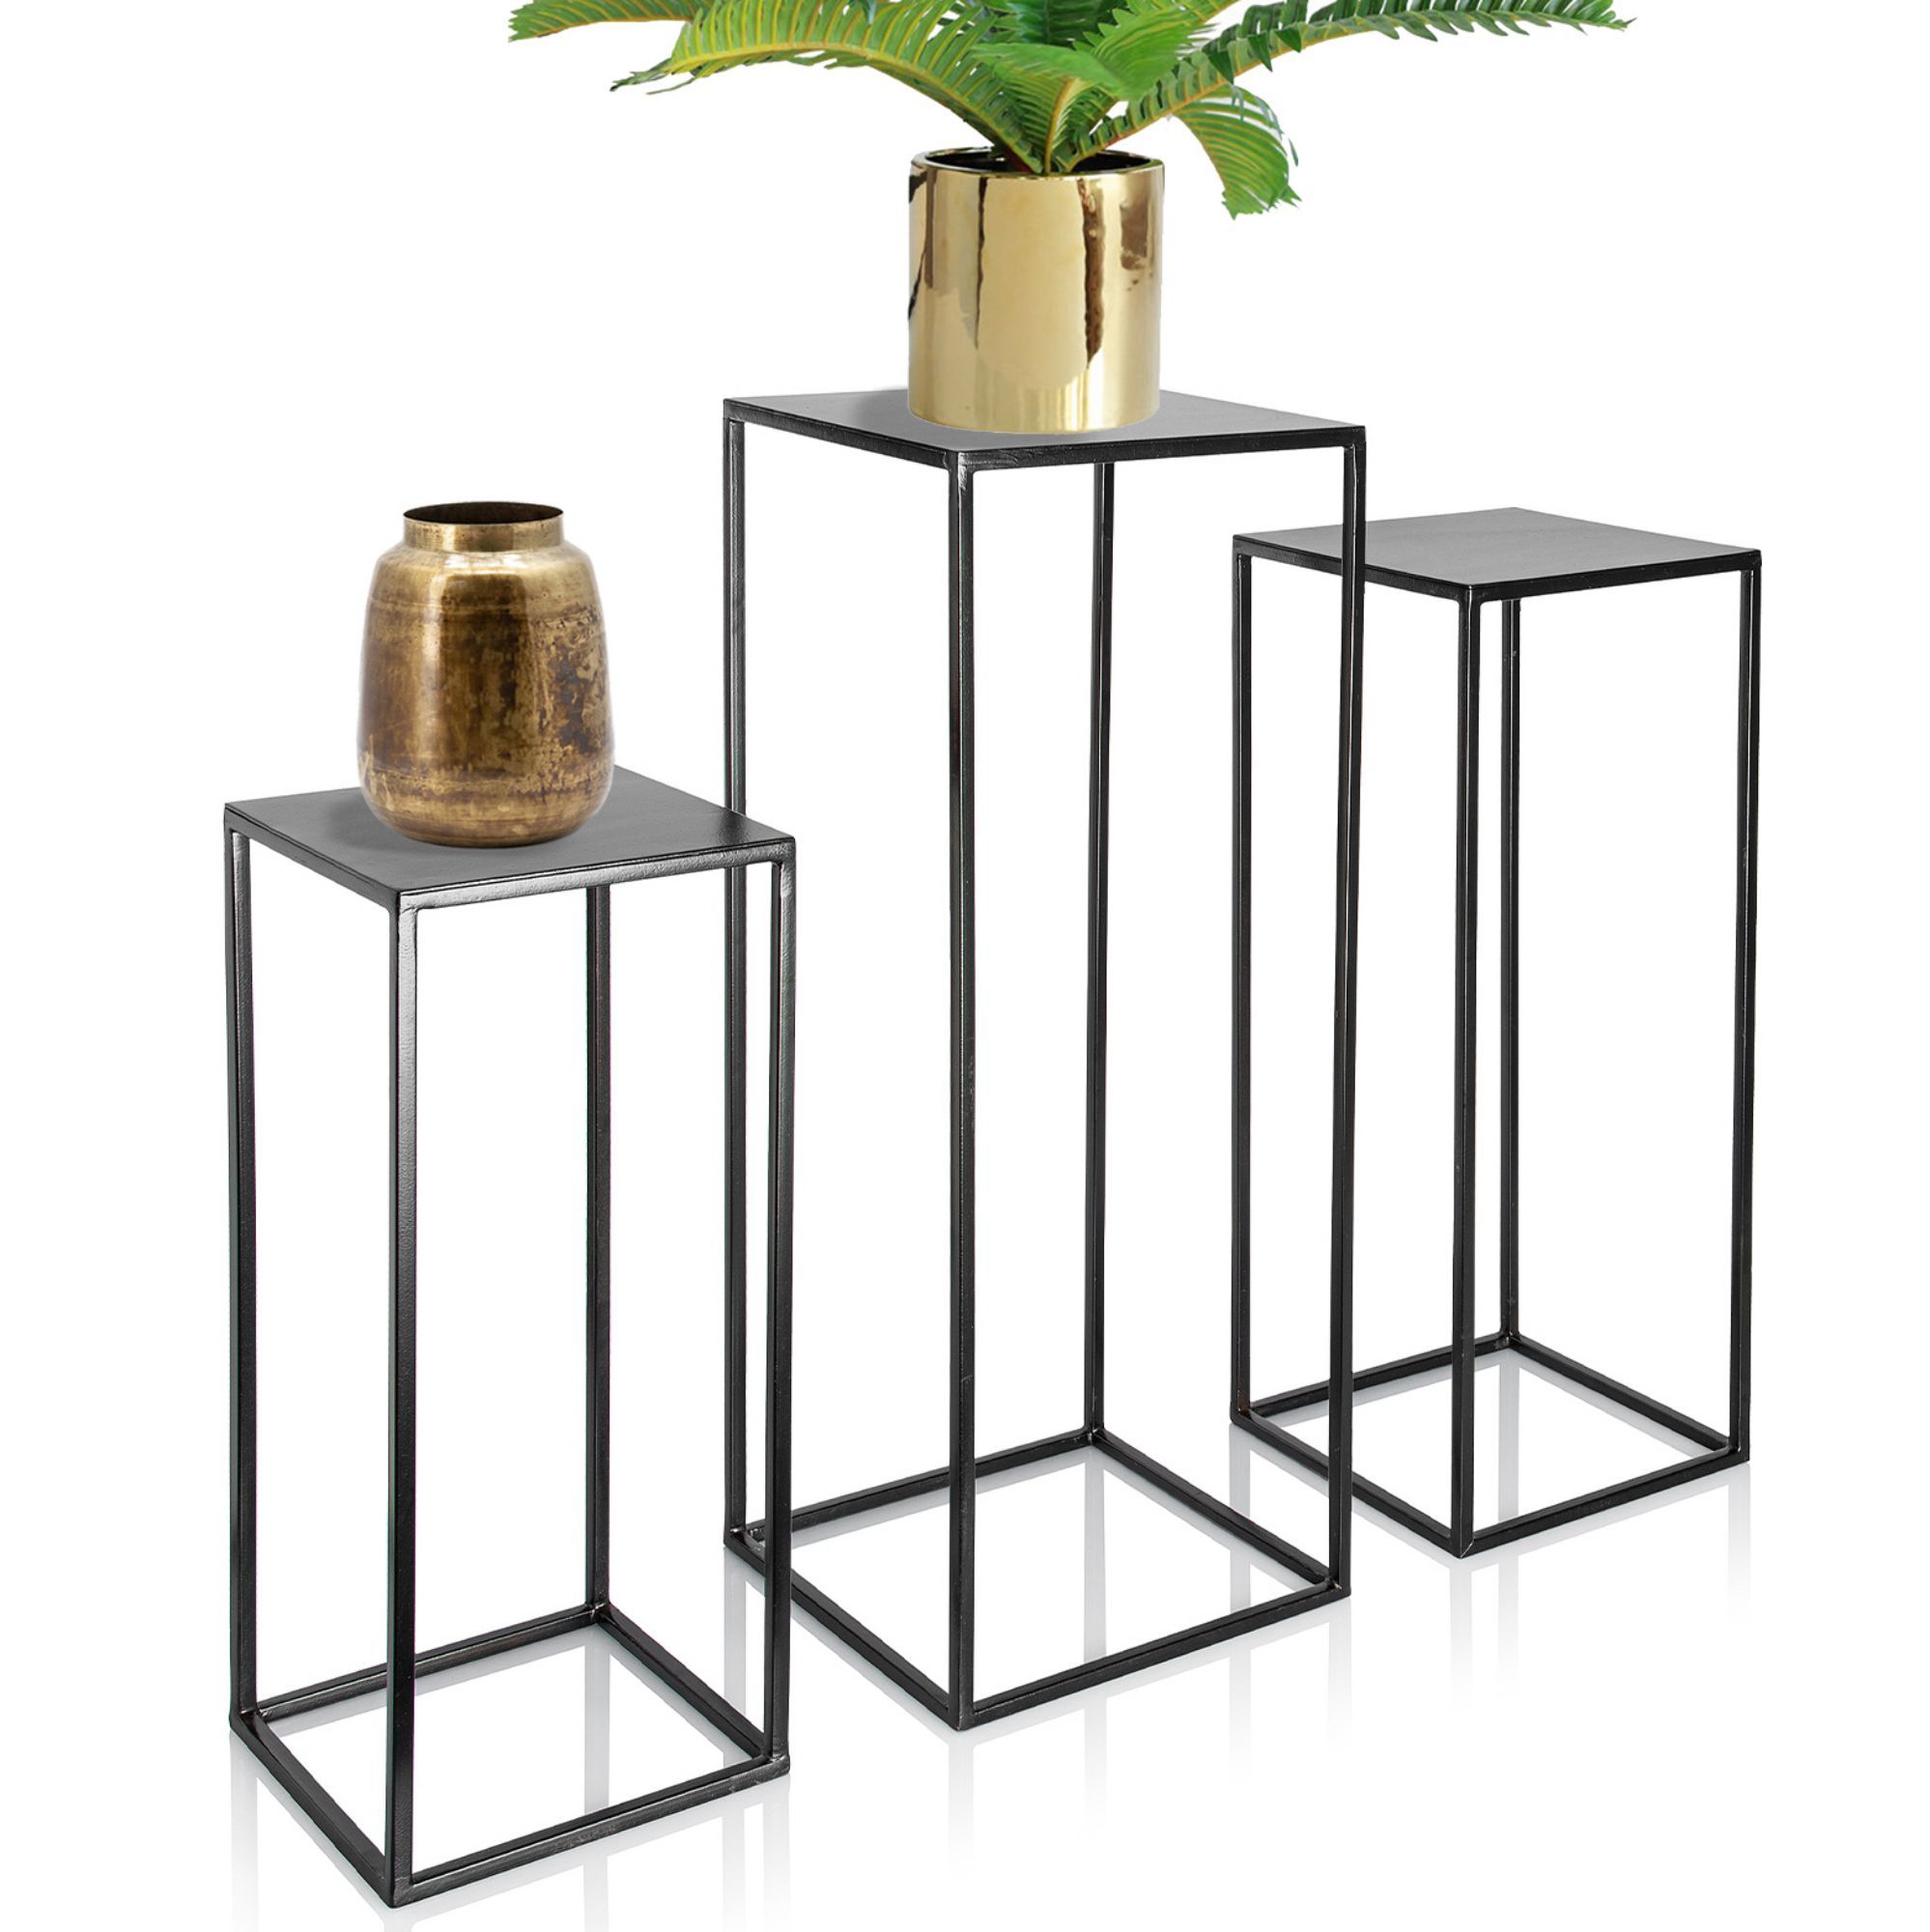 Trio Metal Plant Stand With High Square Rack Flower Holder | Kimisty Regarding Metal Plant Stands (View 5 of 15)